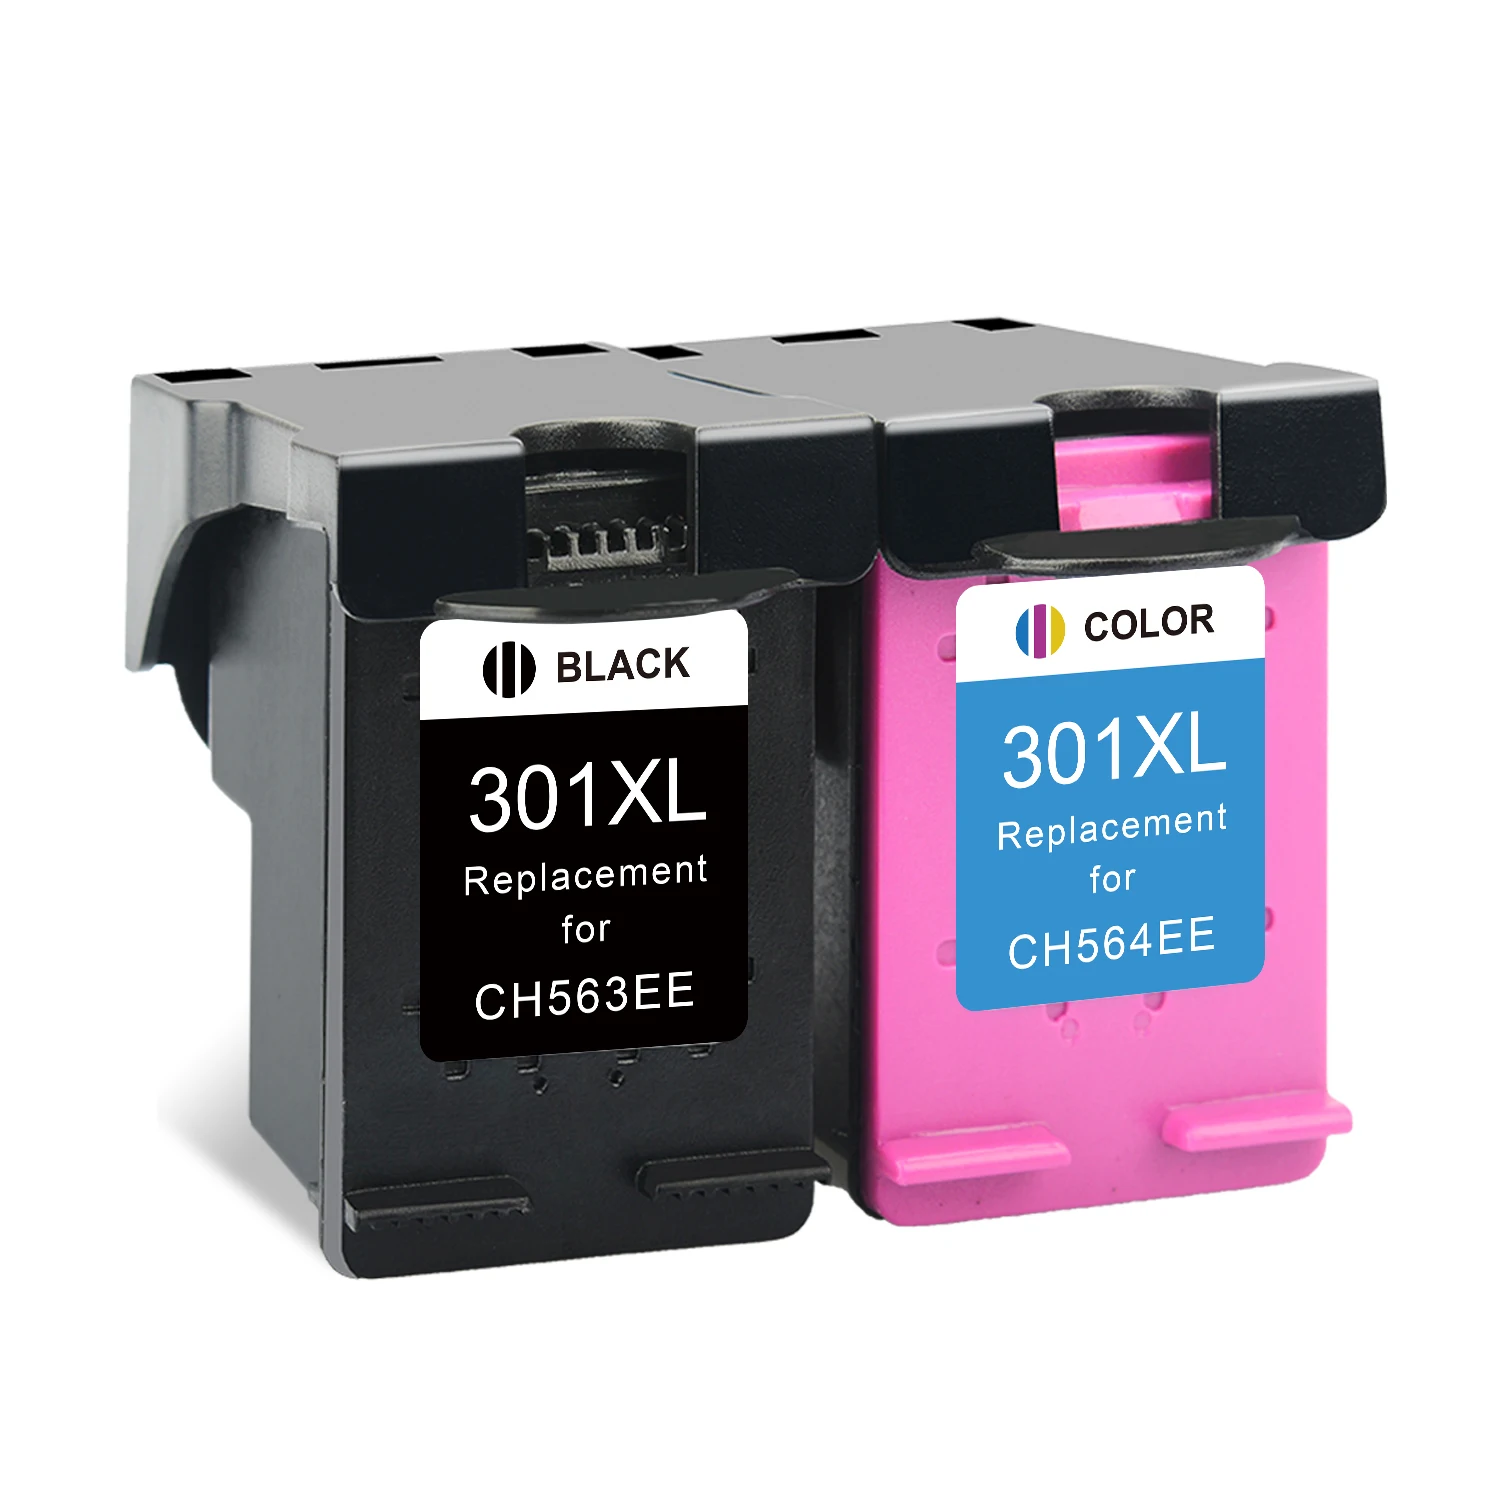 

Ink Cartridge Replacement For HP 301 HP301 XL Ink Cartridges Officejet 4630 4631 4632 4634 4635 4636 4639 Printer